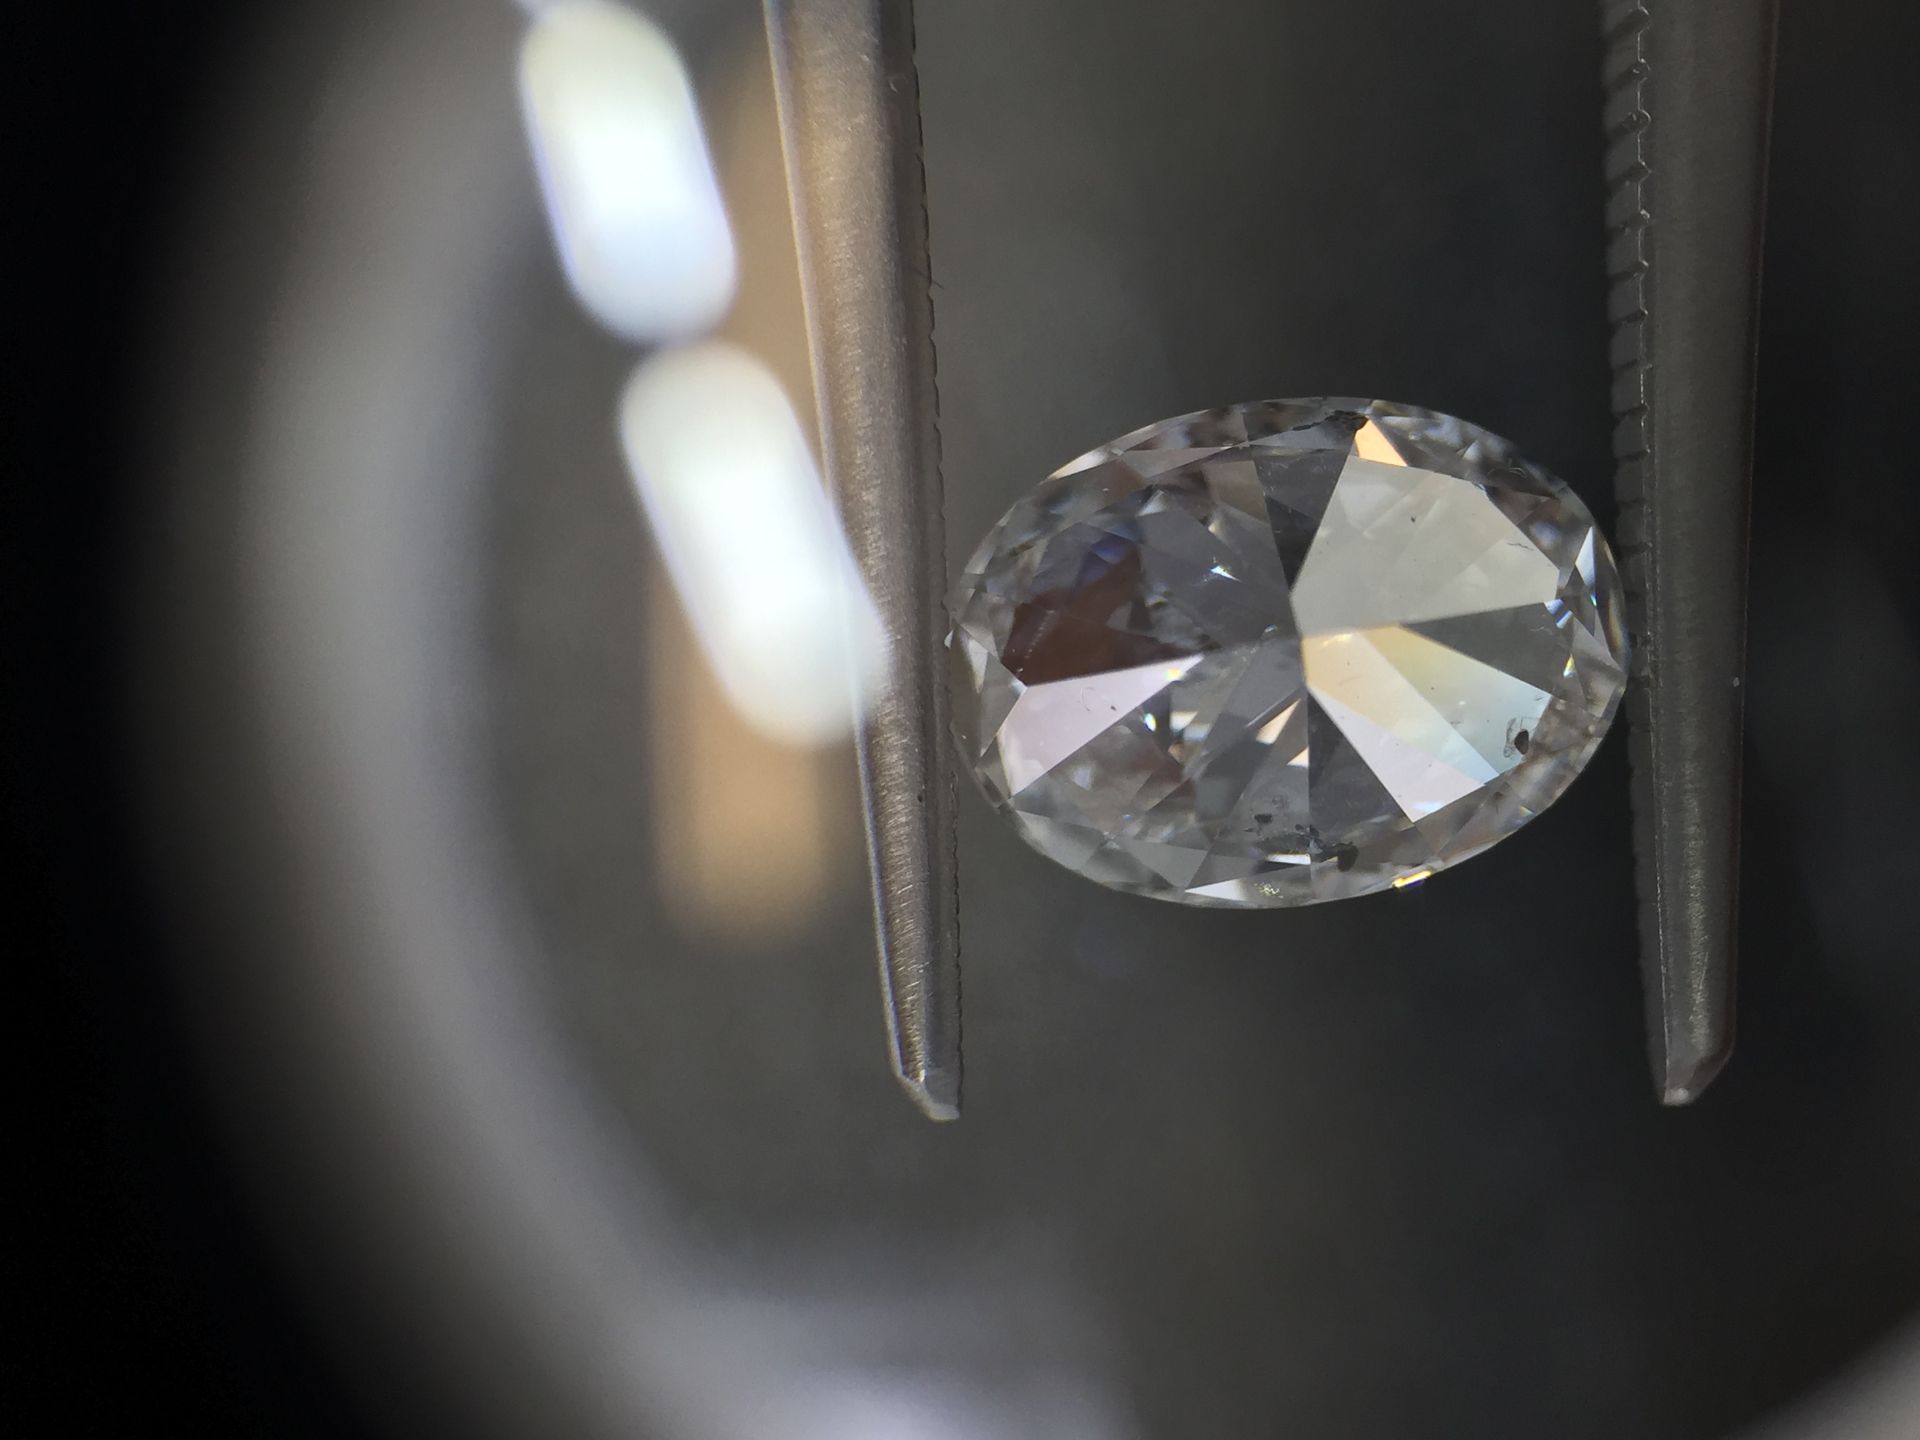 1.01ct oval cut diamond. D colour, SI2 clarity. No certificate. Valued at £7775 - Image 2 of 3